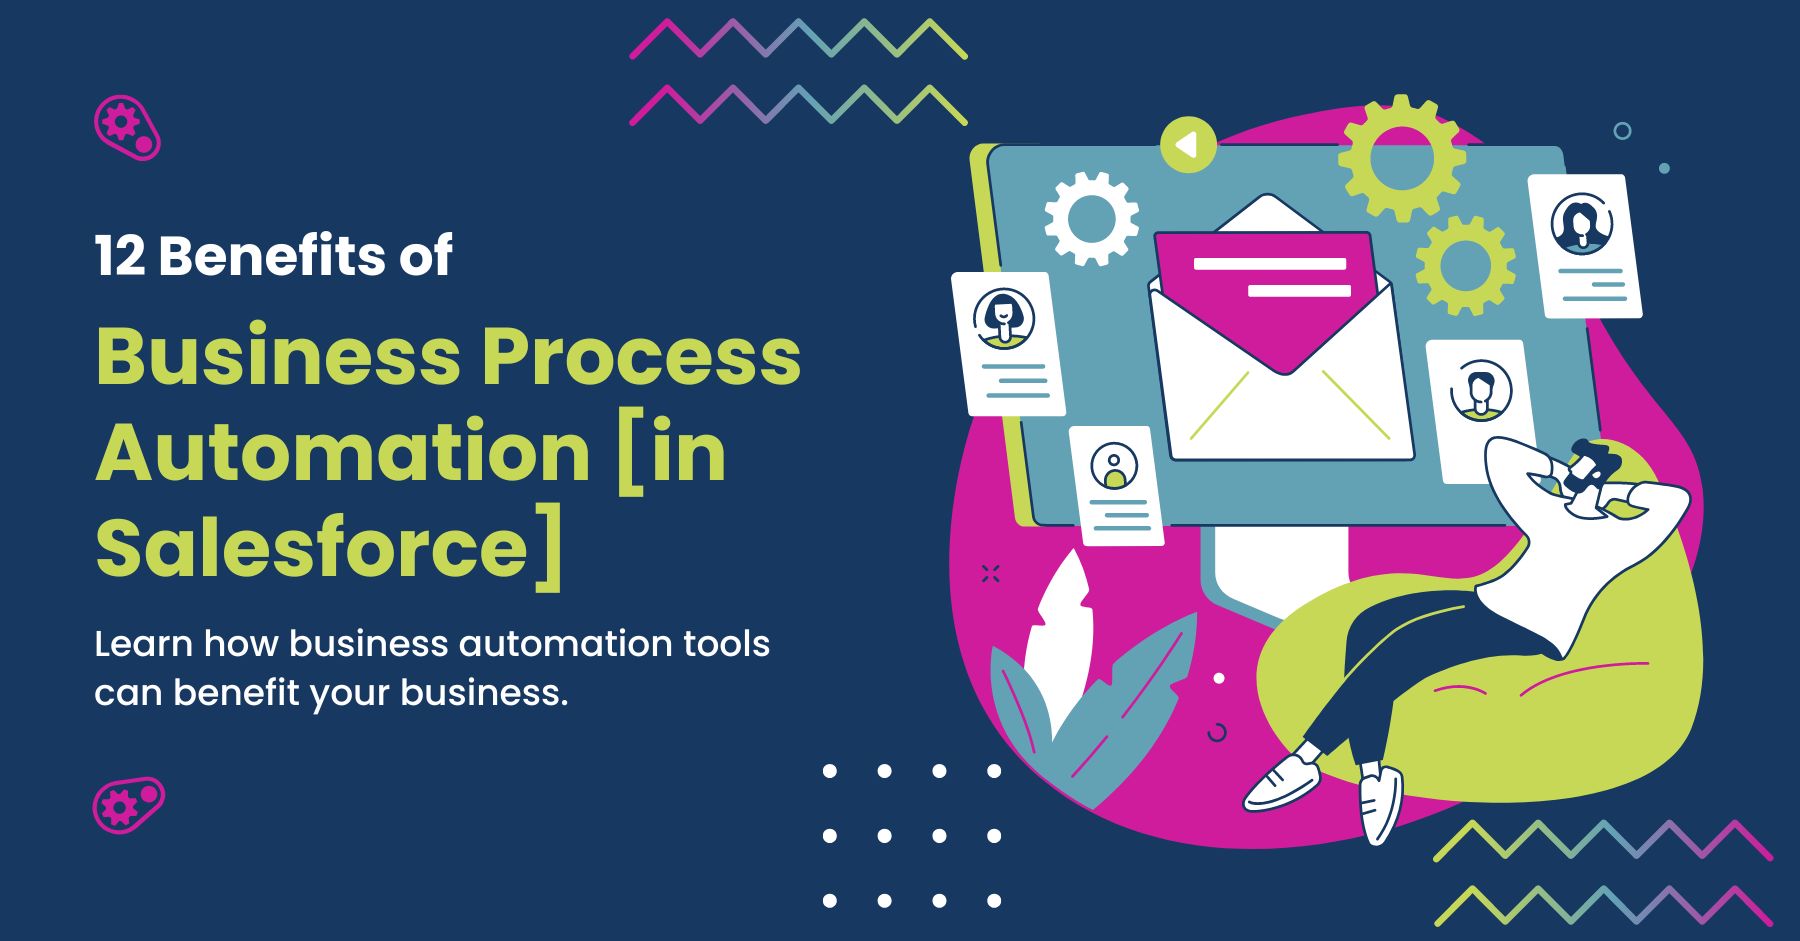 Top benefits of business process automation in Salesforce.